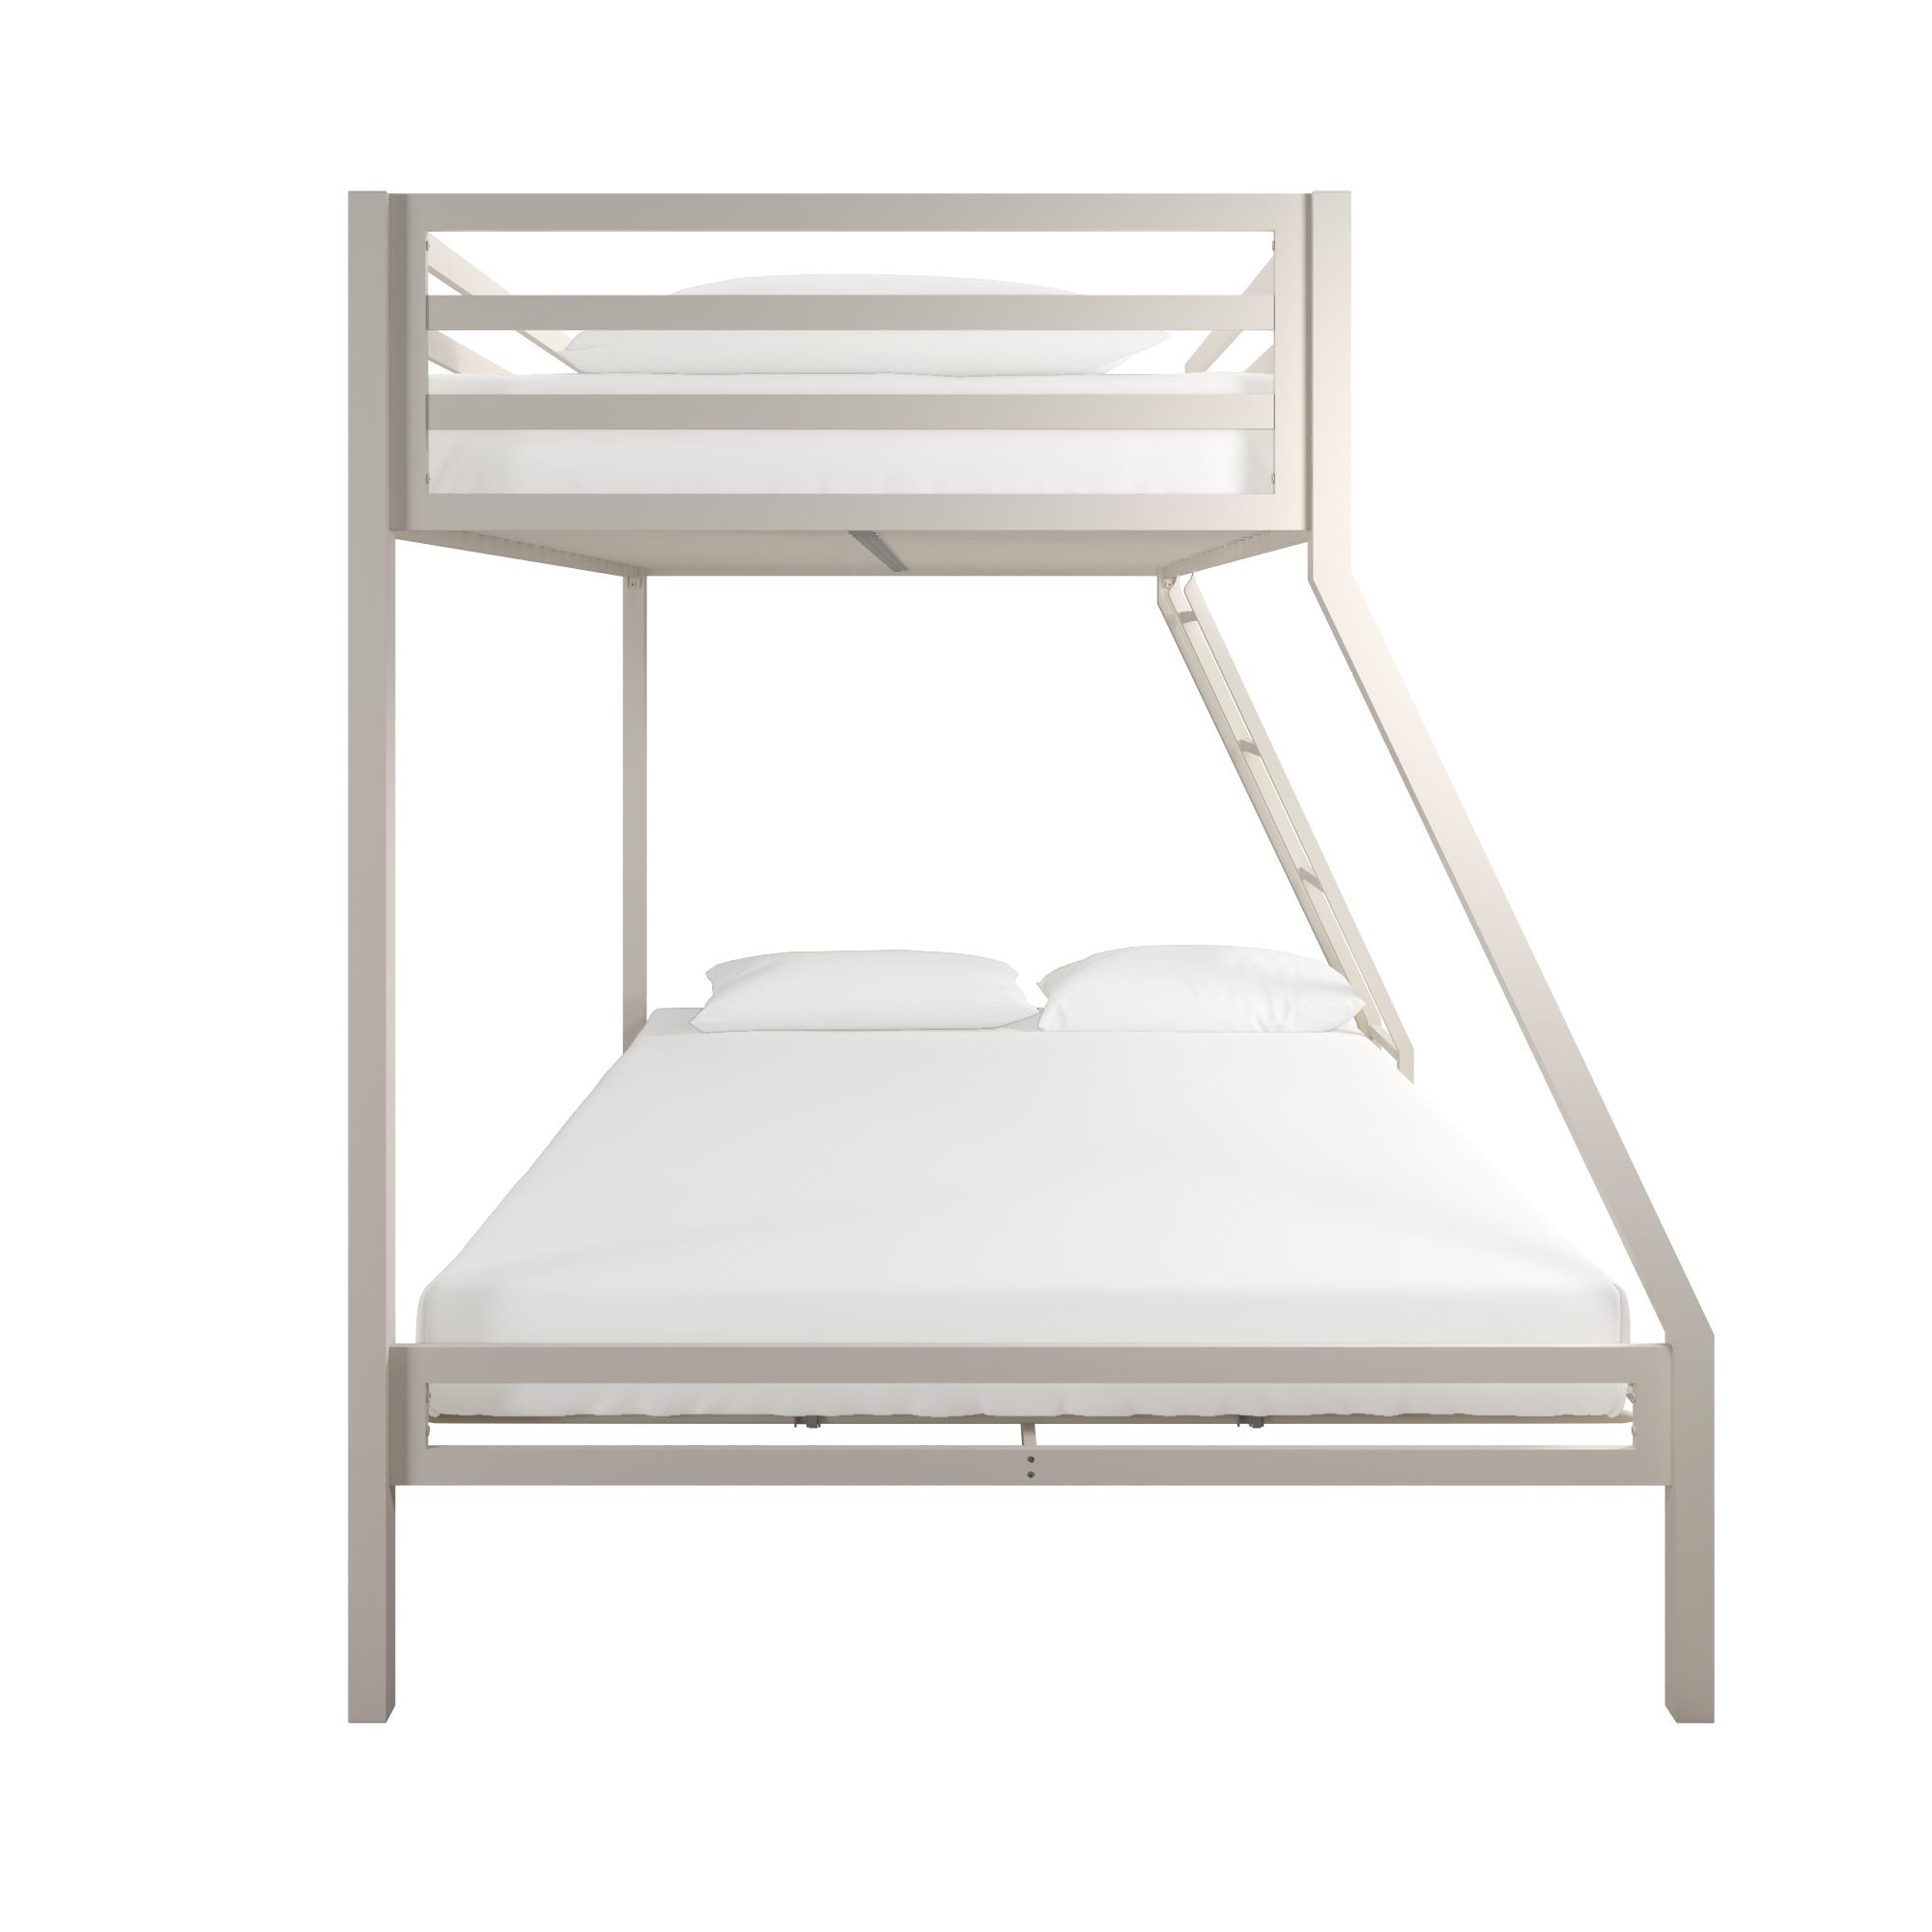 Mainstays Premium Twin over Full Metal Bunk Bed, Off White - image 13 of 13